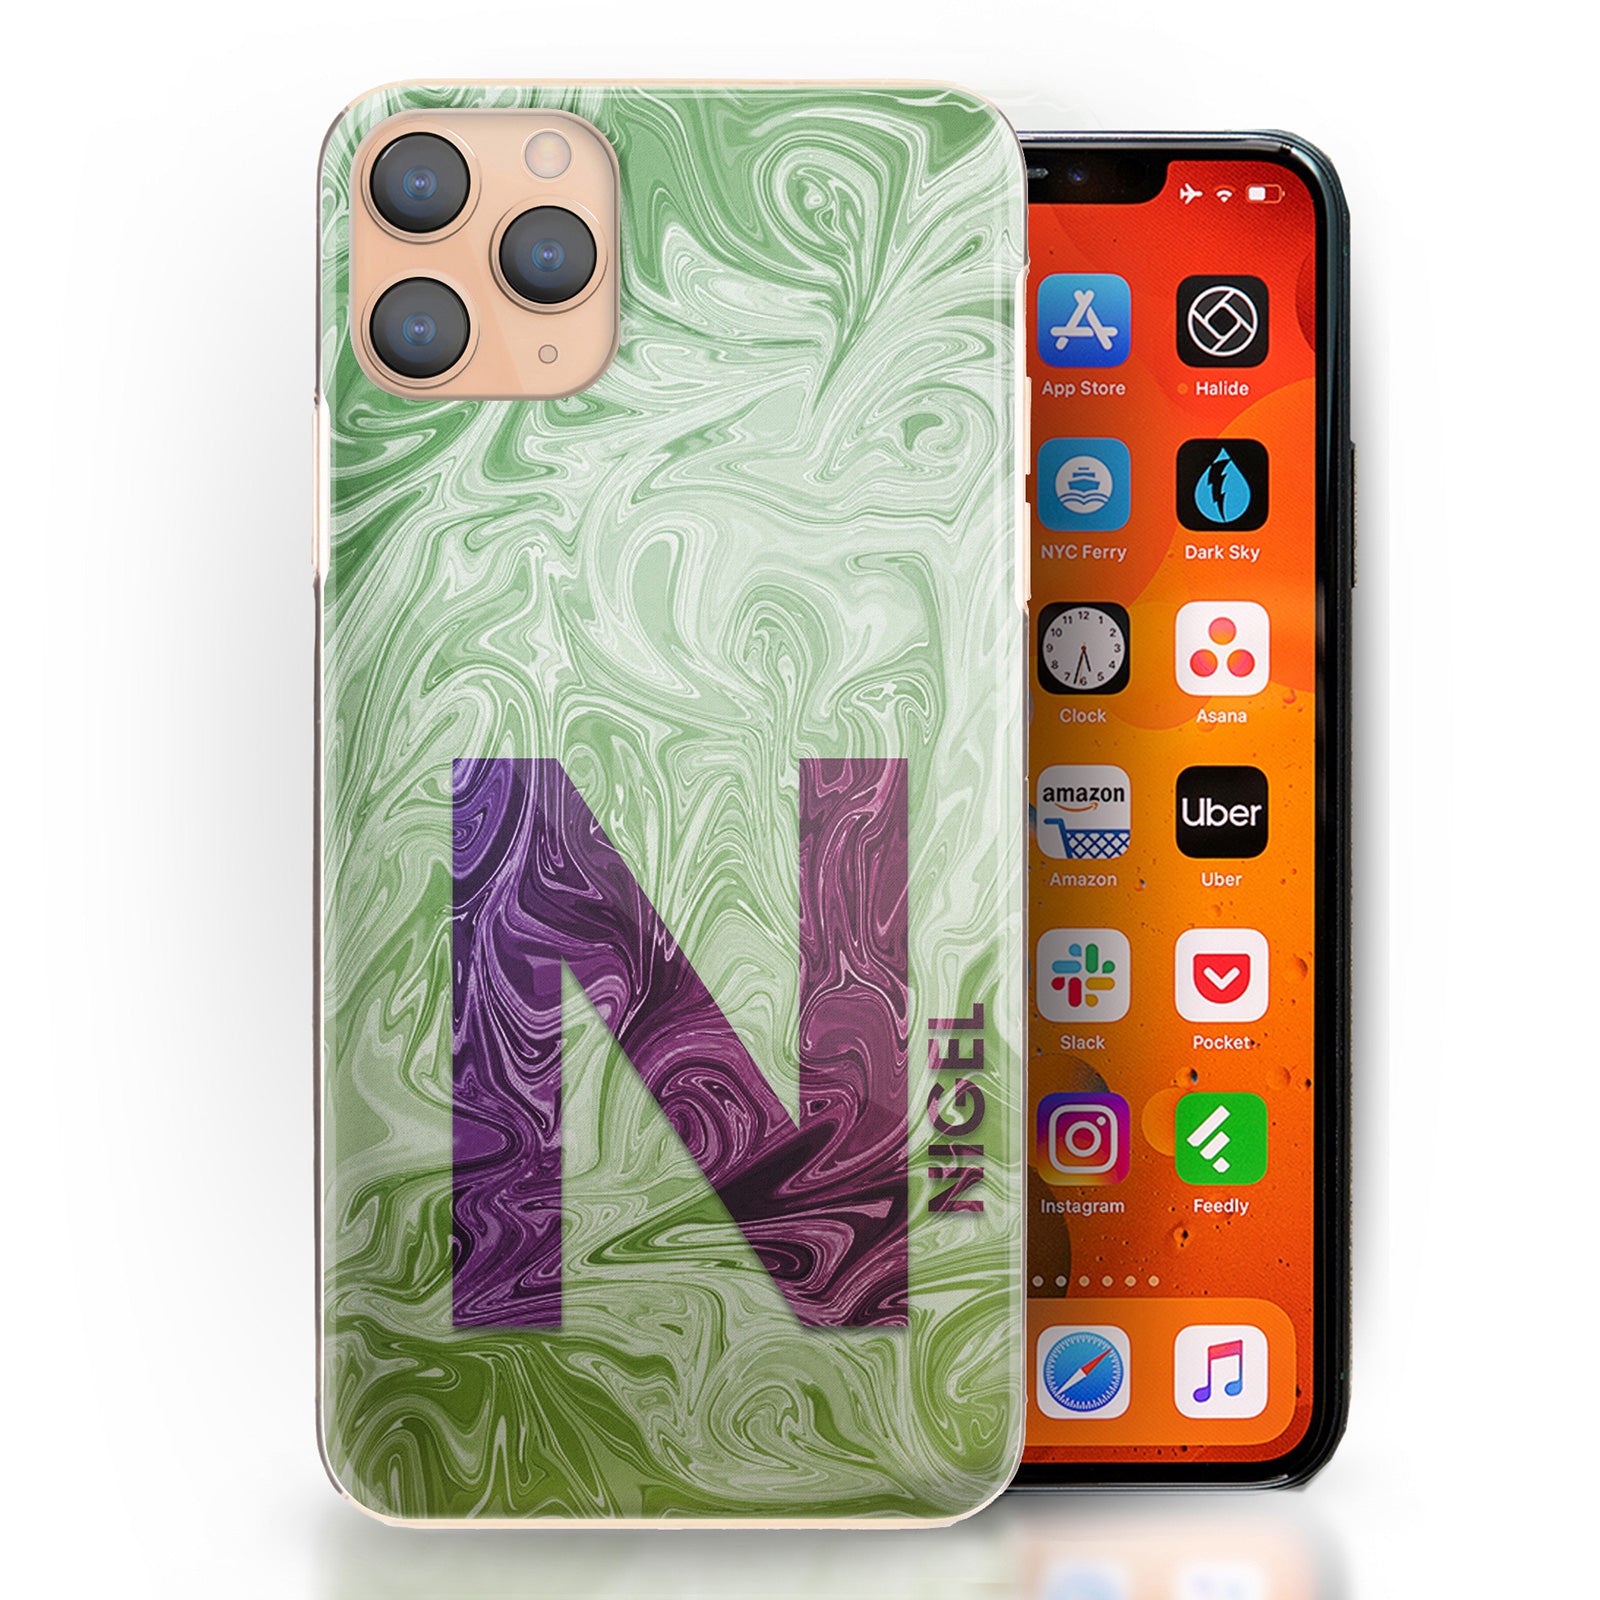 Personalised Motorola Phone Hard Case with Purple Text and Initial on Green Swirled Marble